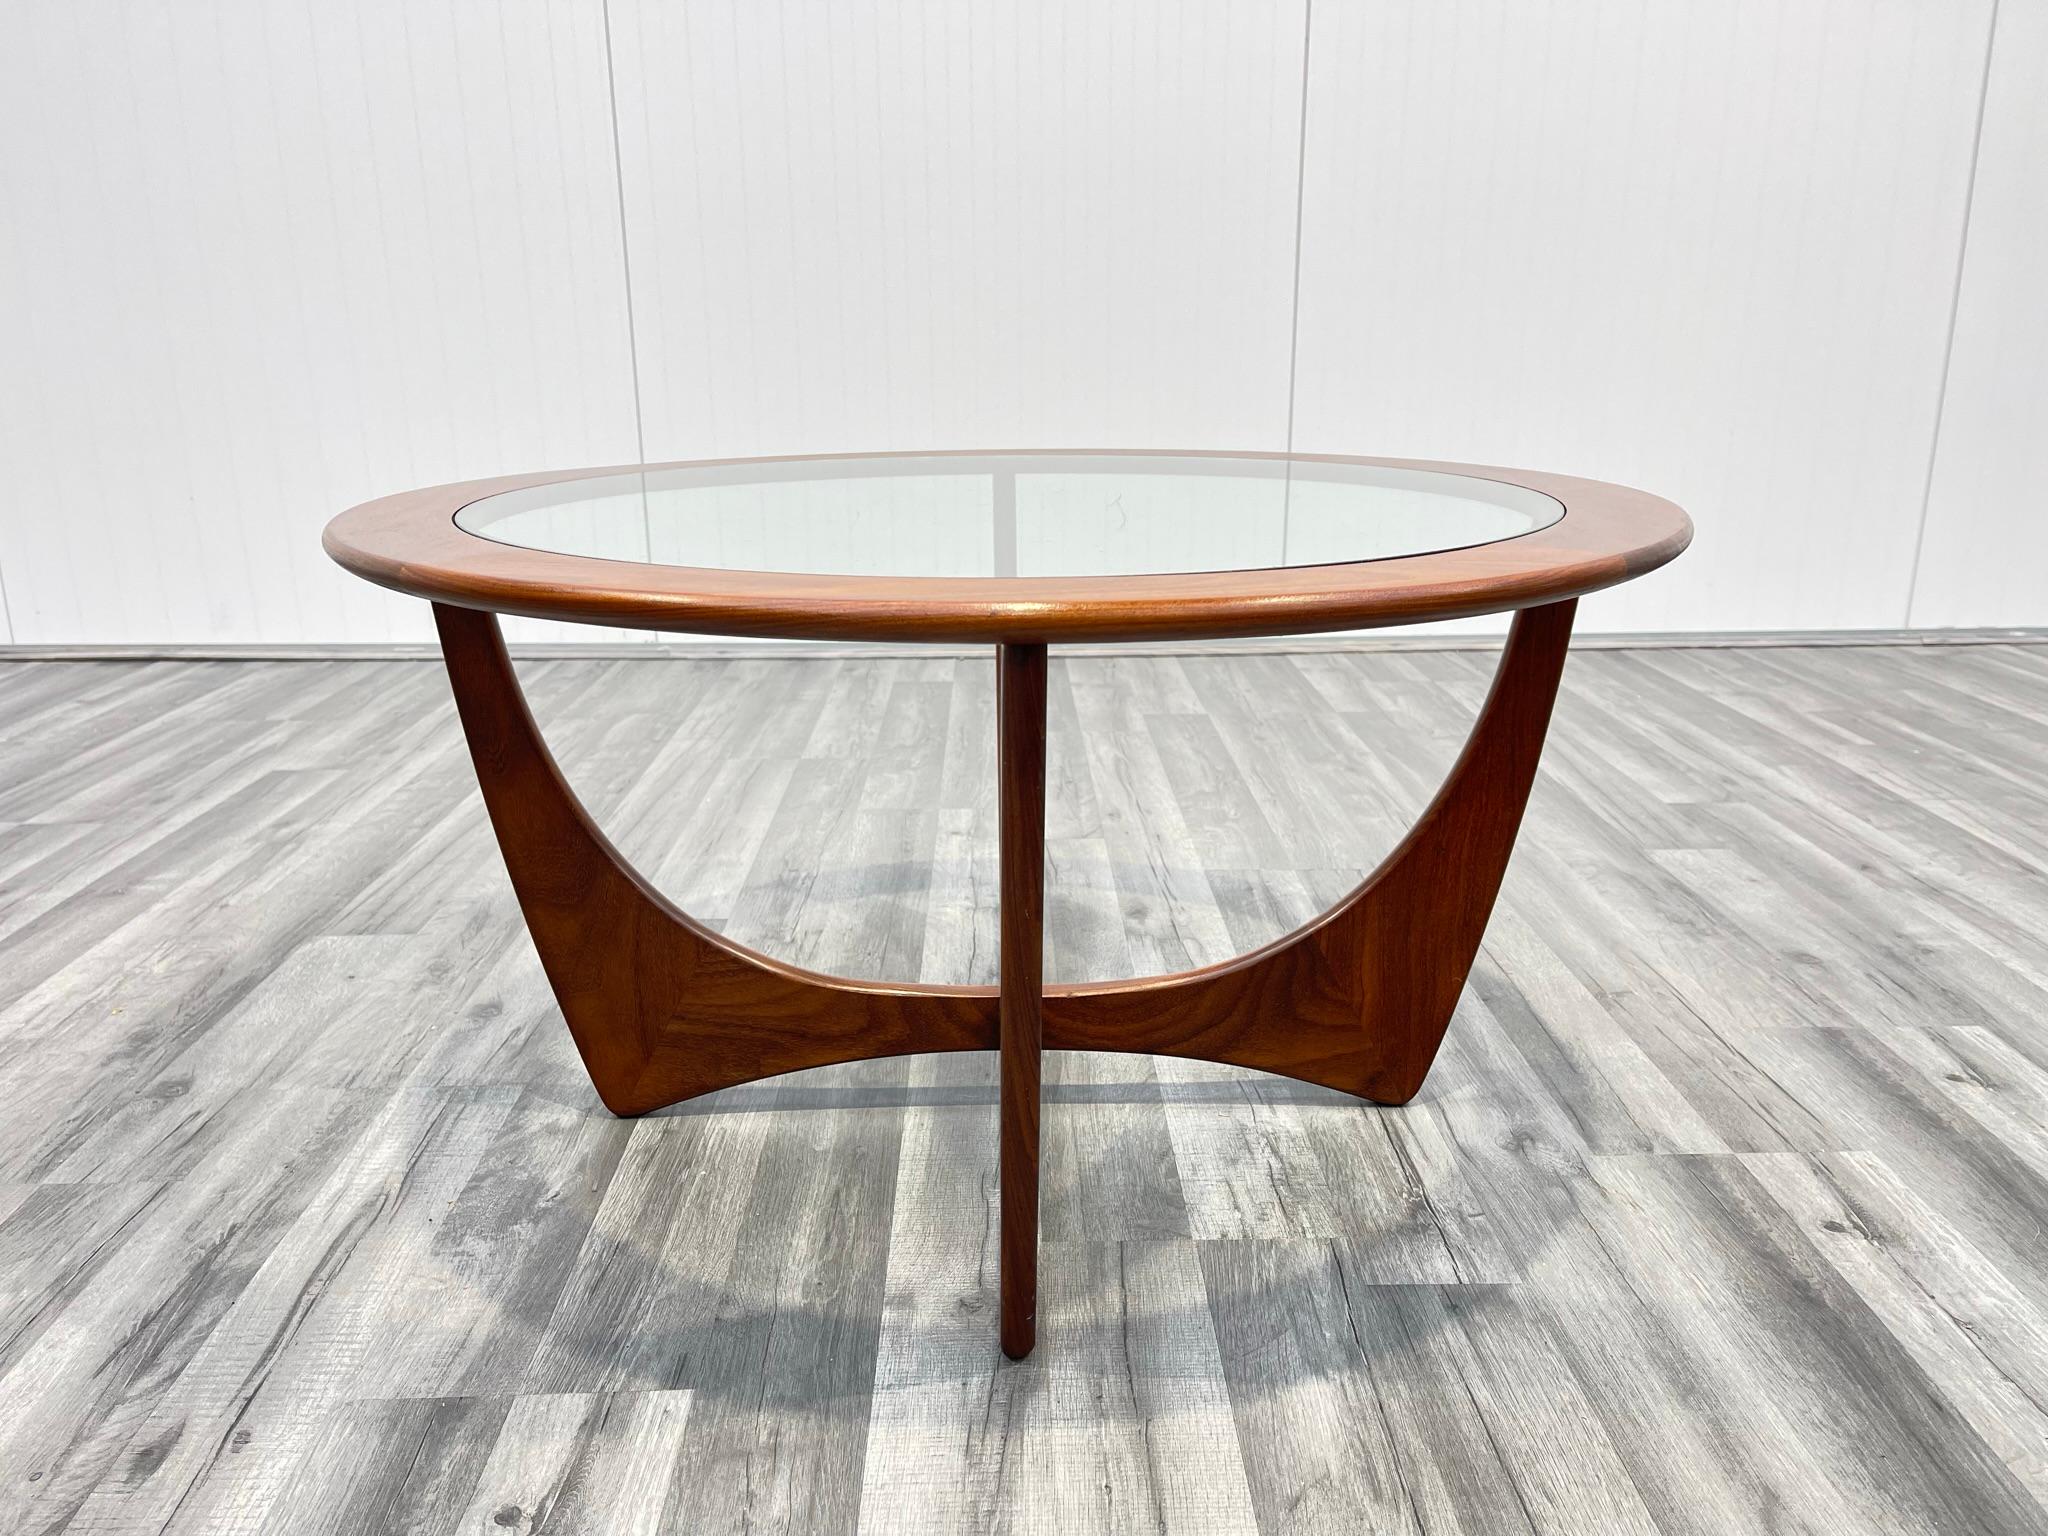 20th Century Astro Teak and Glass Circular Mid-Century Coffee Table by VB Wilkins for G Plan For Sale